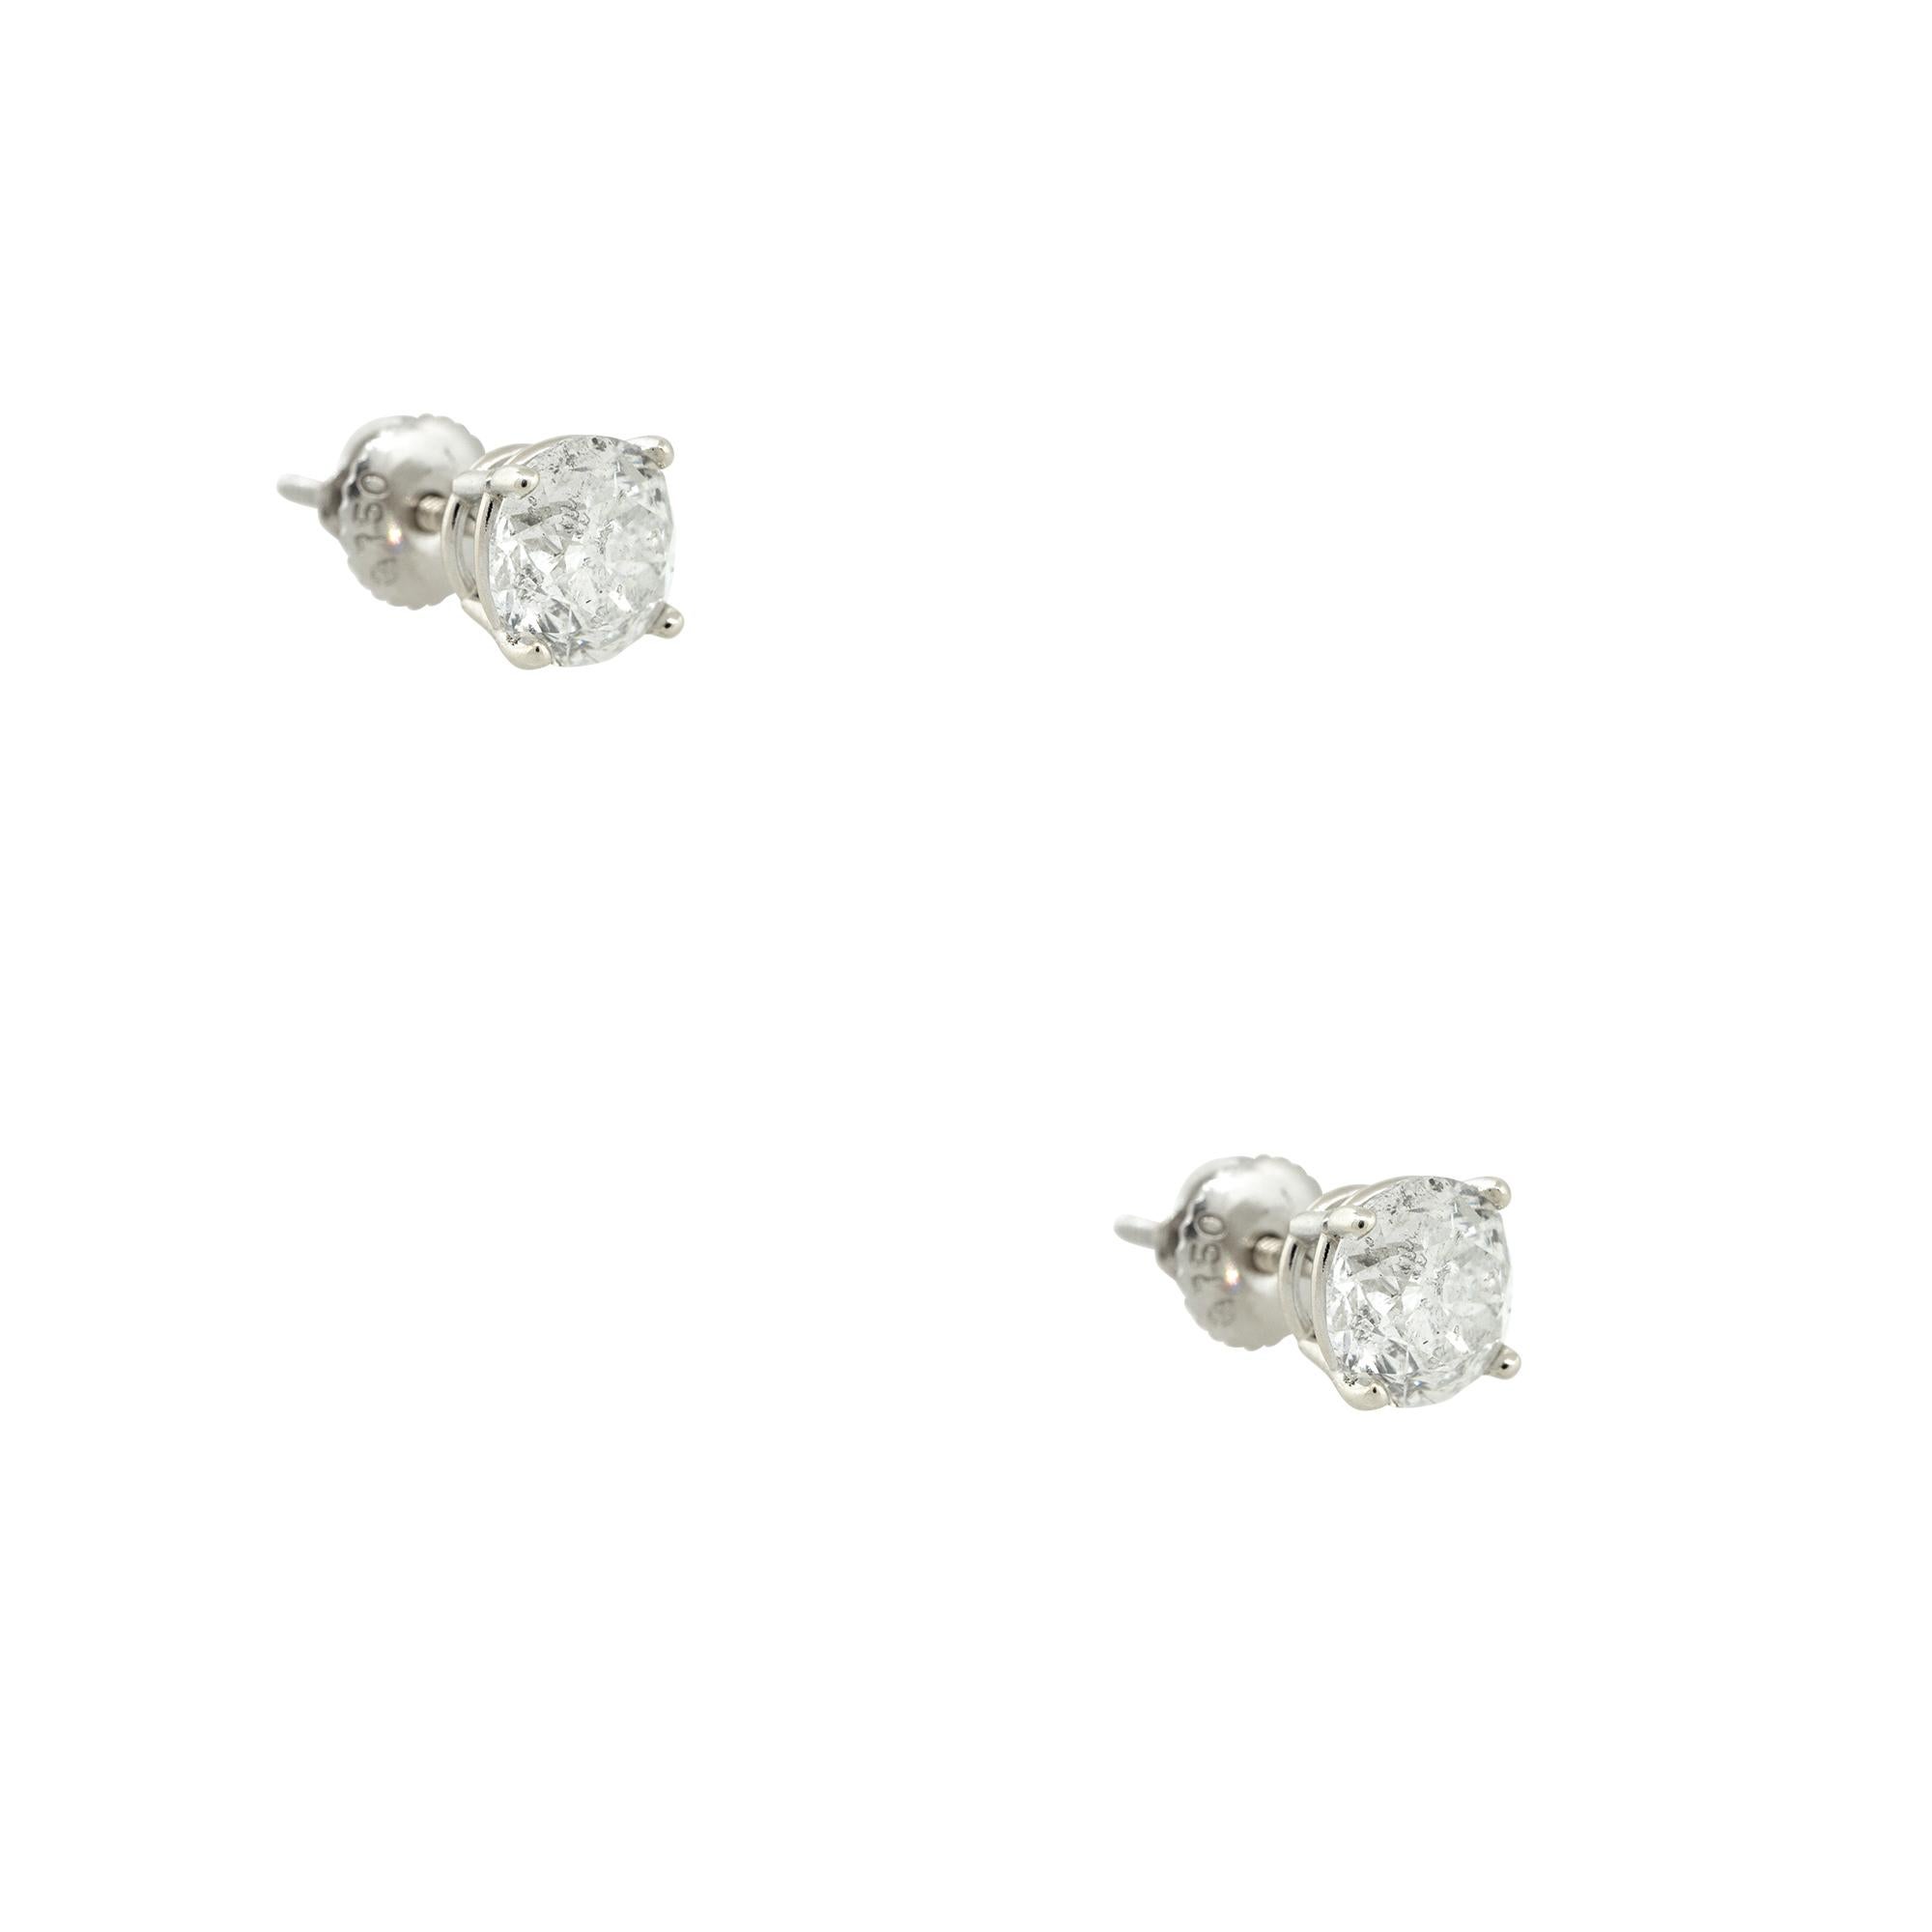 14k White Gold 2.35ctw Round Brilliant Diamond Stud Earrings
Material: 14k White Gold
Diamond Details: Diamonds are approximately 1.175ct each of Round Brilliant Diamonds
Color: Approximately G/H in color
Clarity: Approximately I1 in clarity
Earring